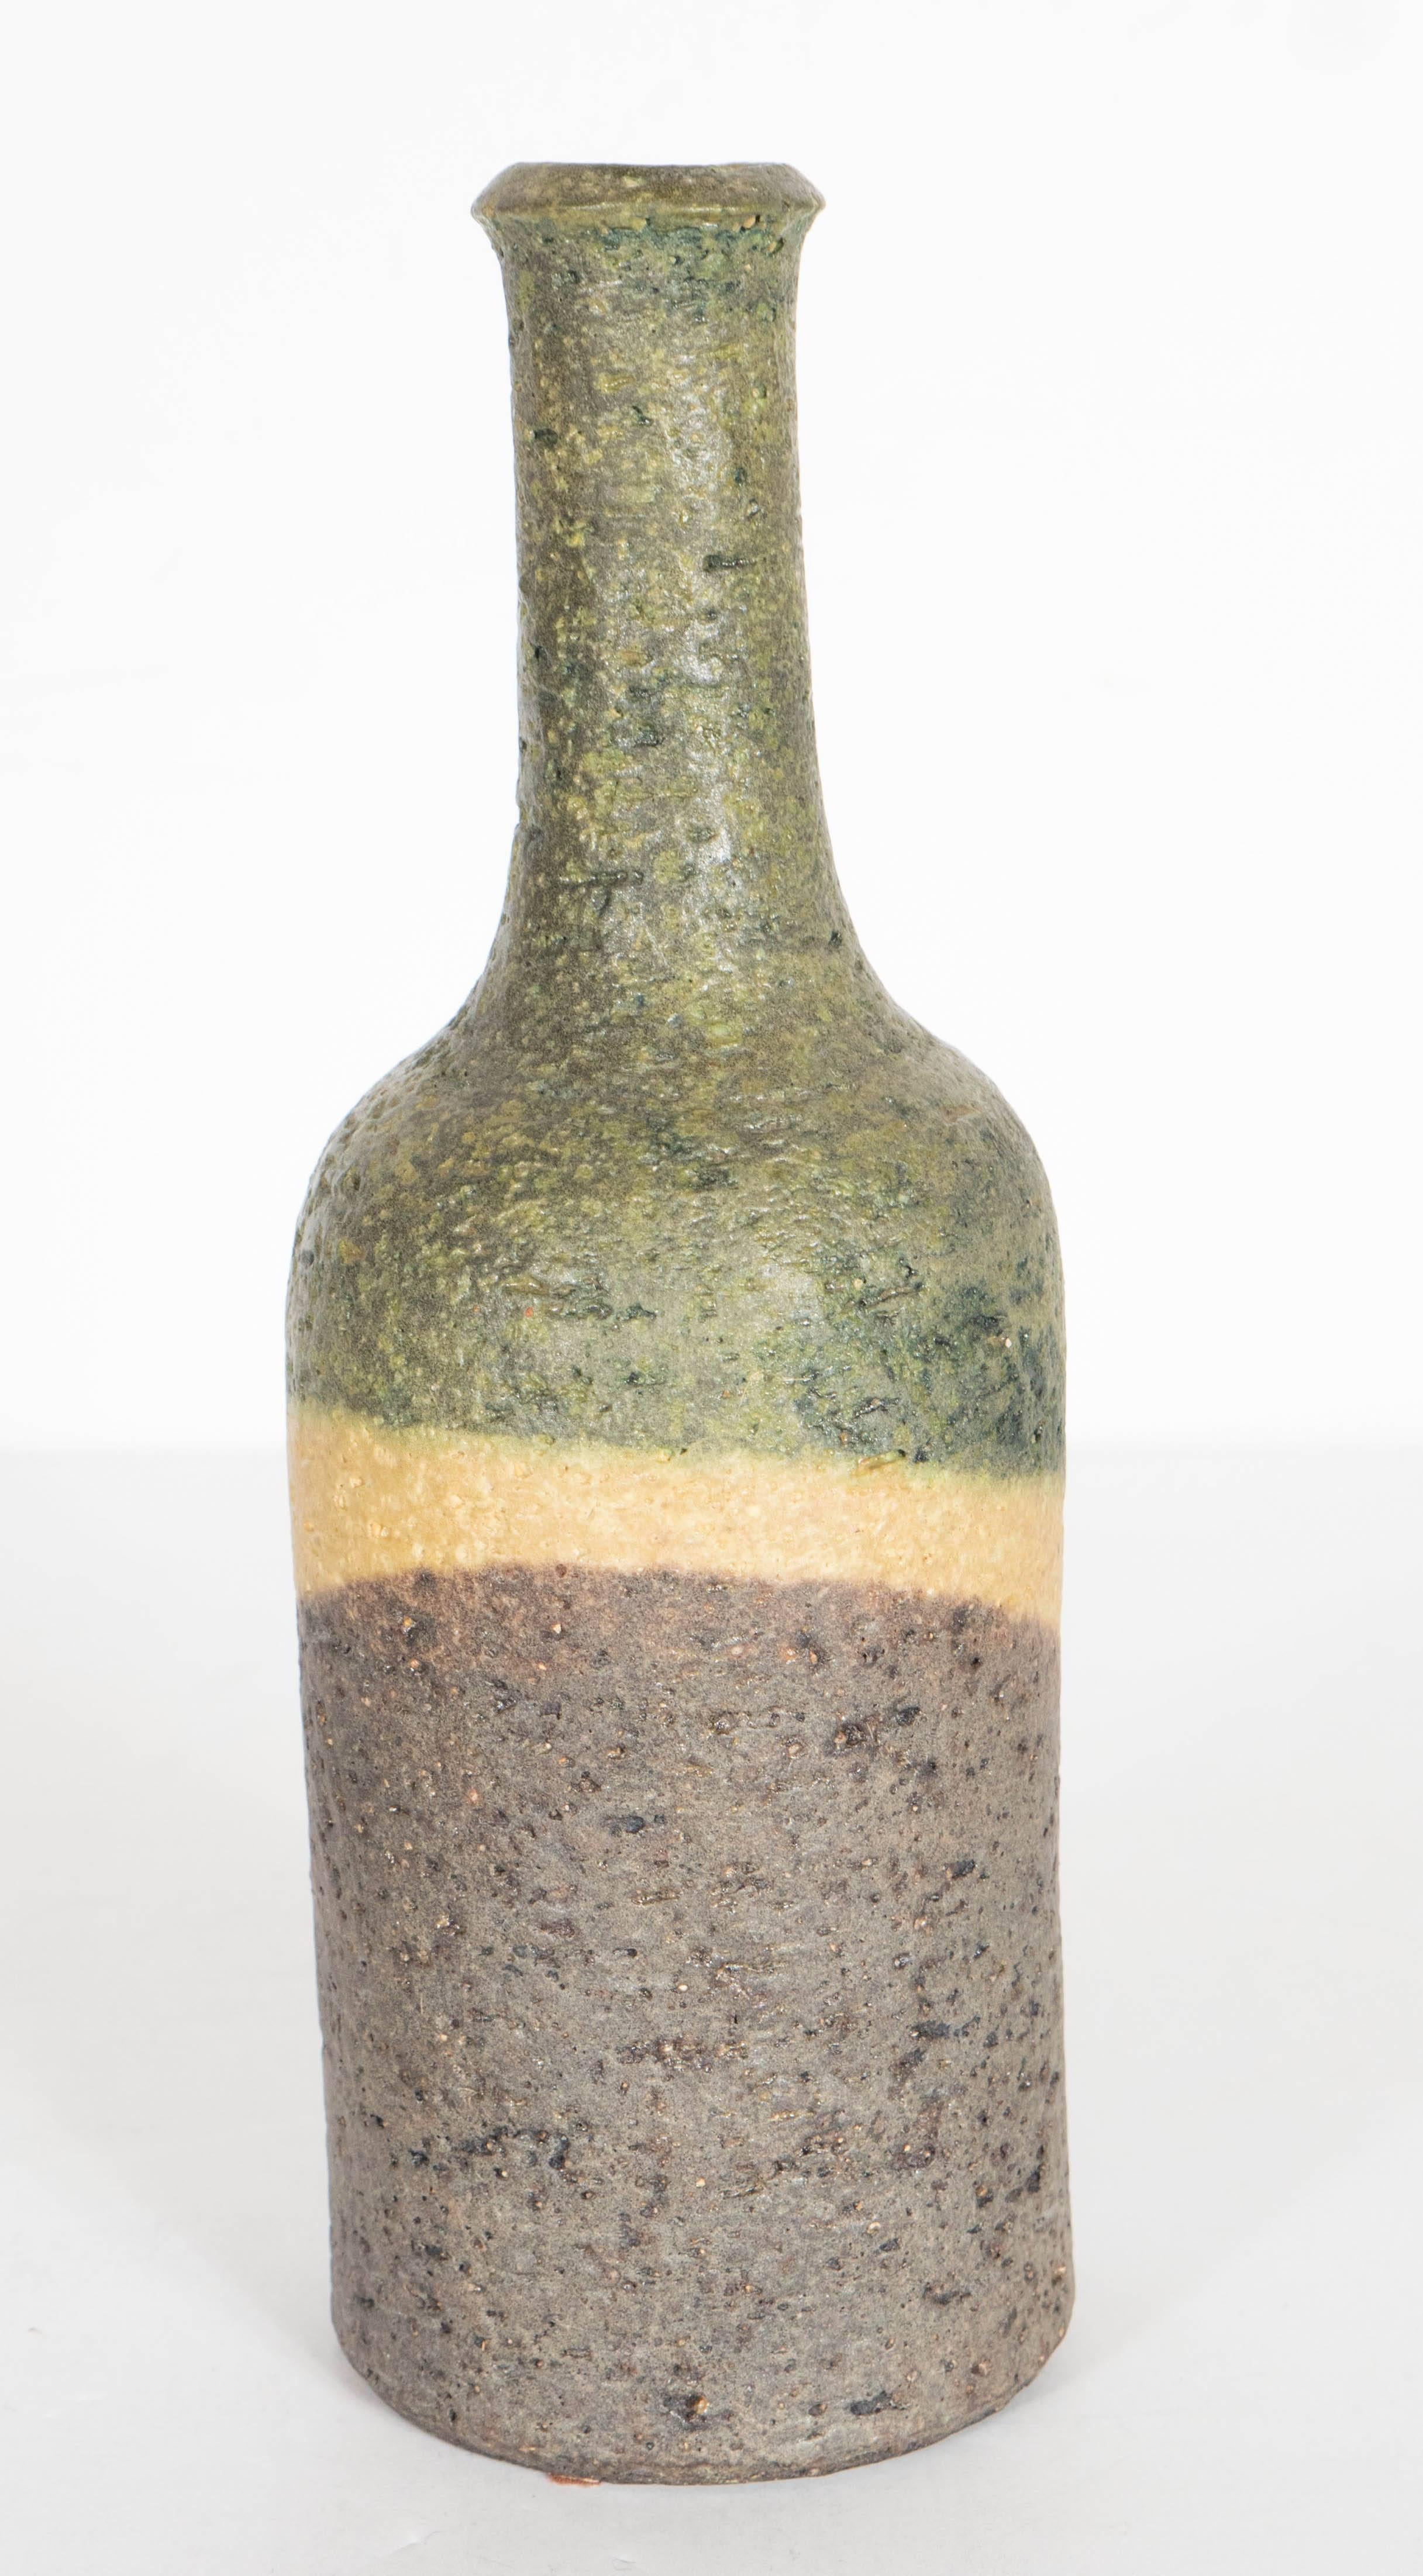 Late 20th Century Attractive Bottle Vase in Organic Tones by Marcello Fantoni for Raymor